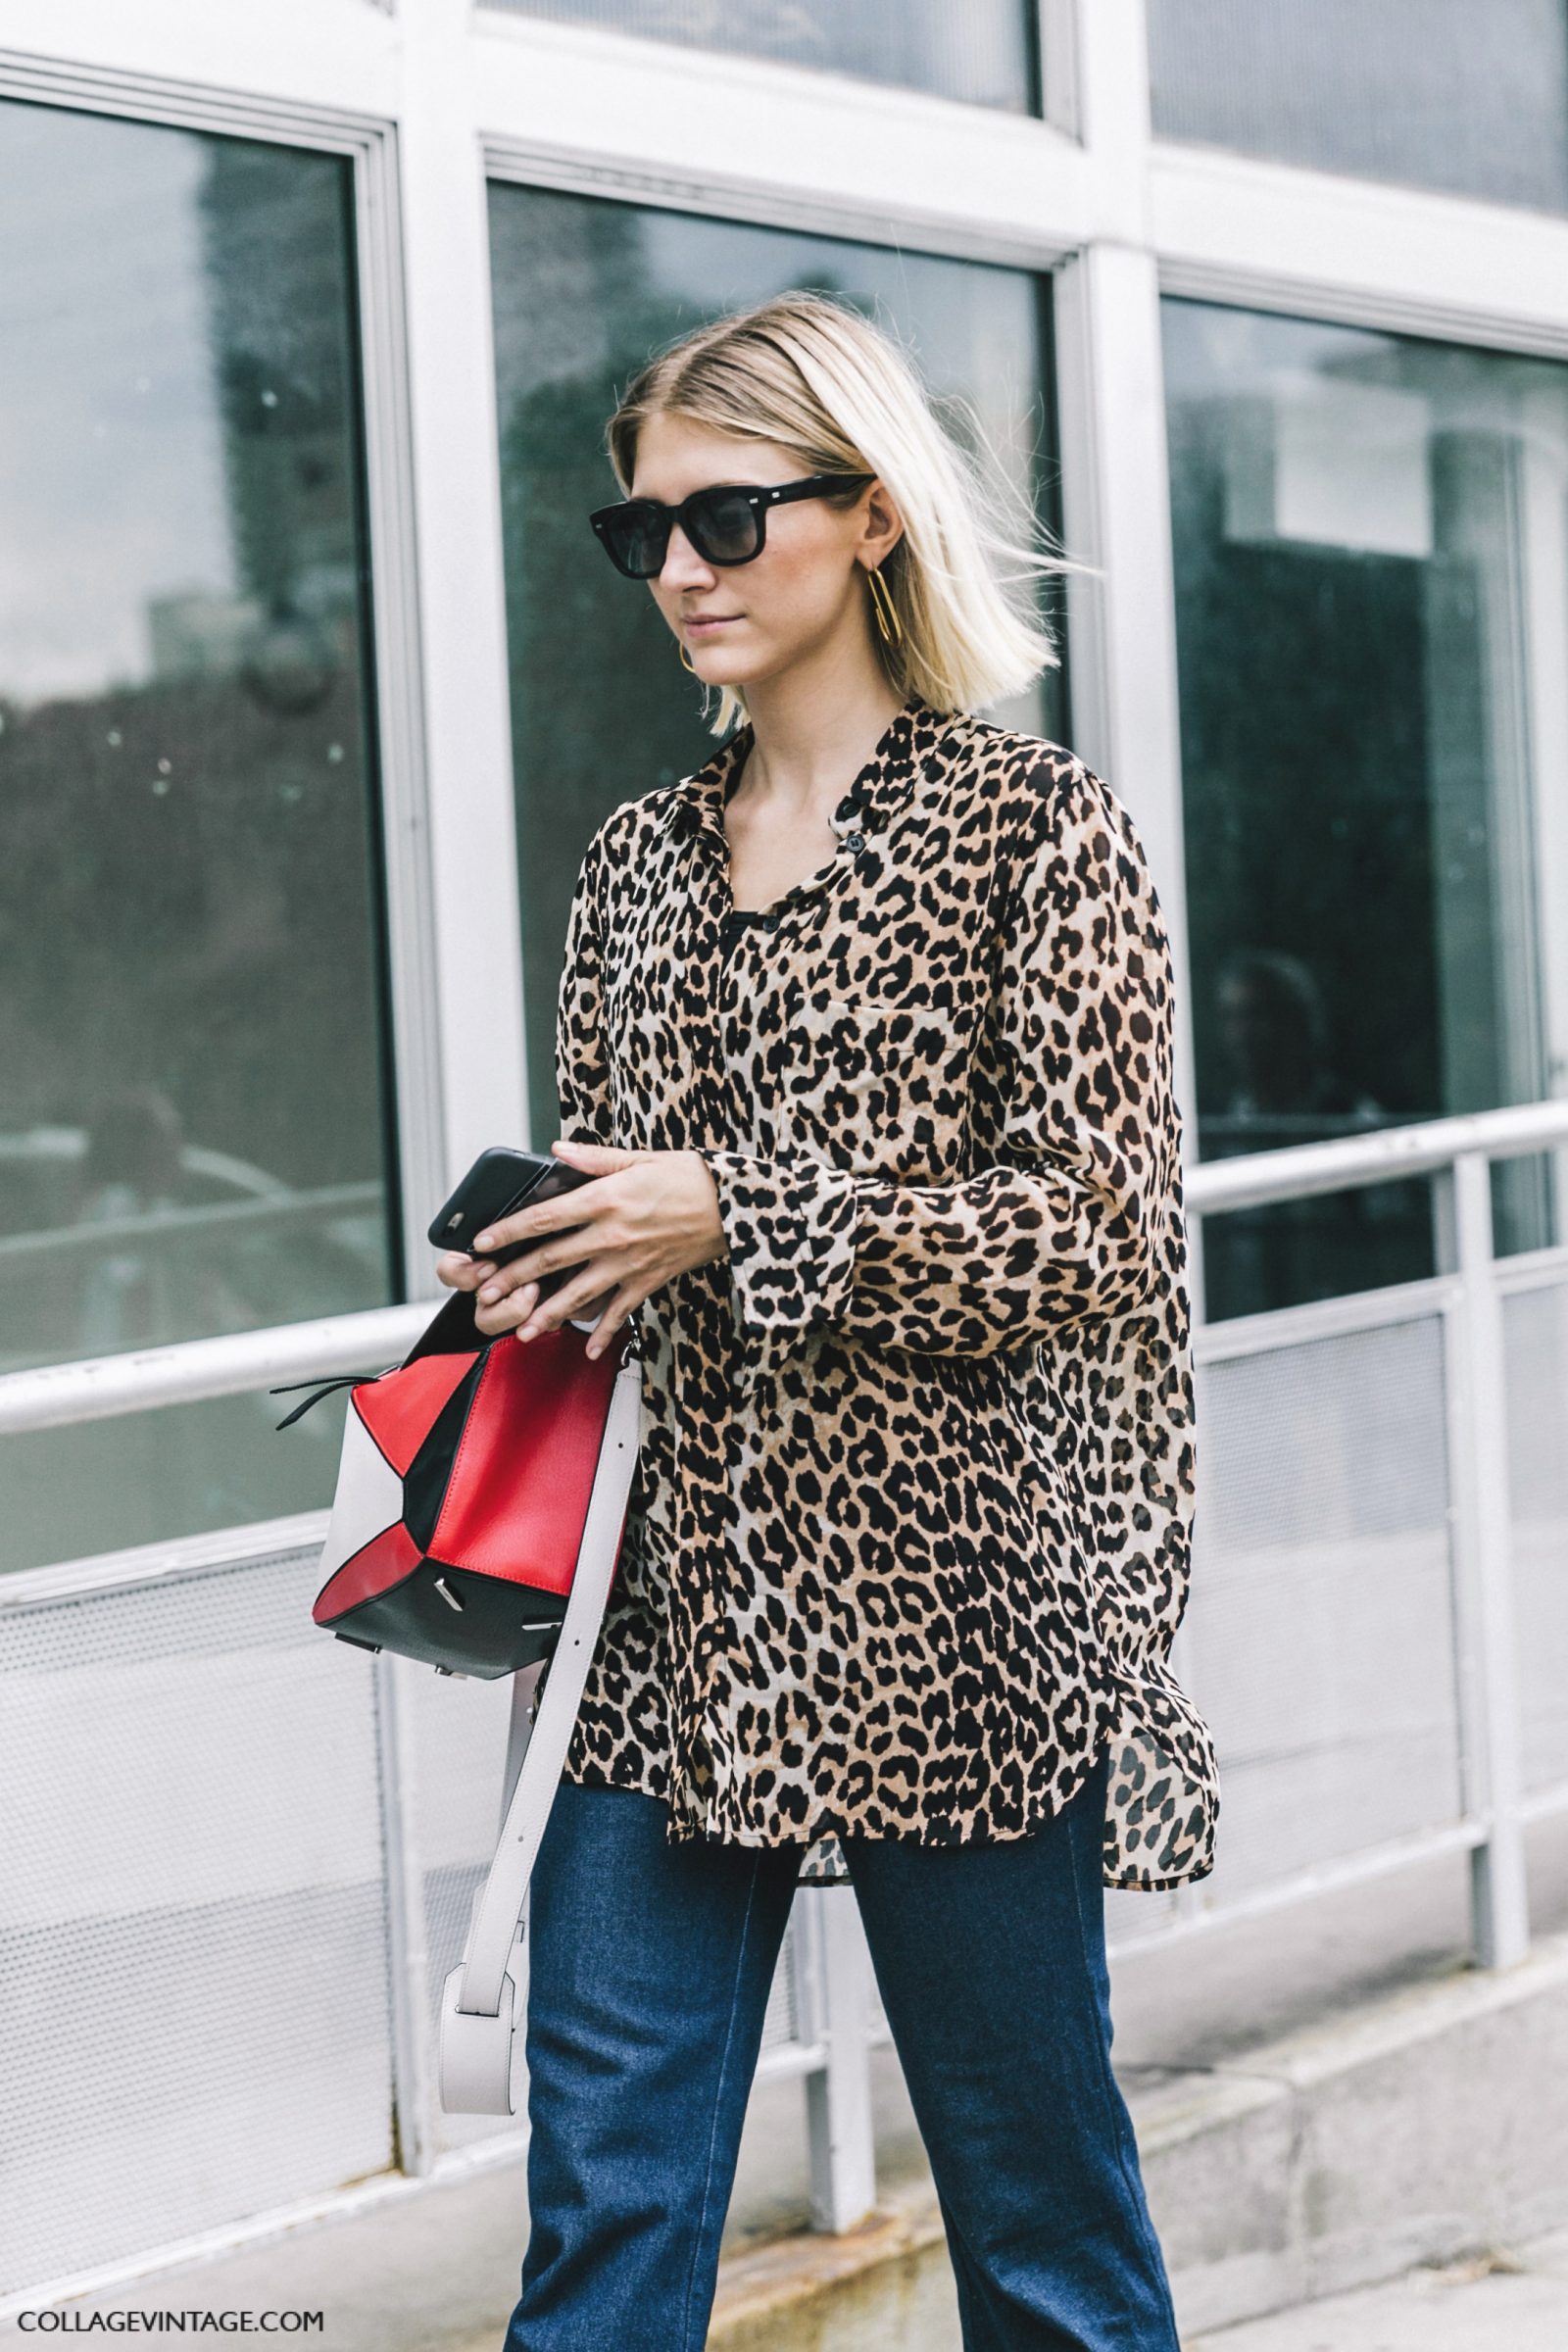 nyfw-new_york_fashion_week_ss17-street_style-outfits-collage_vintage-leopard_blouse-jeans-puzzle_bag_loewe